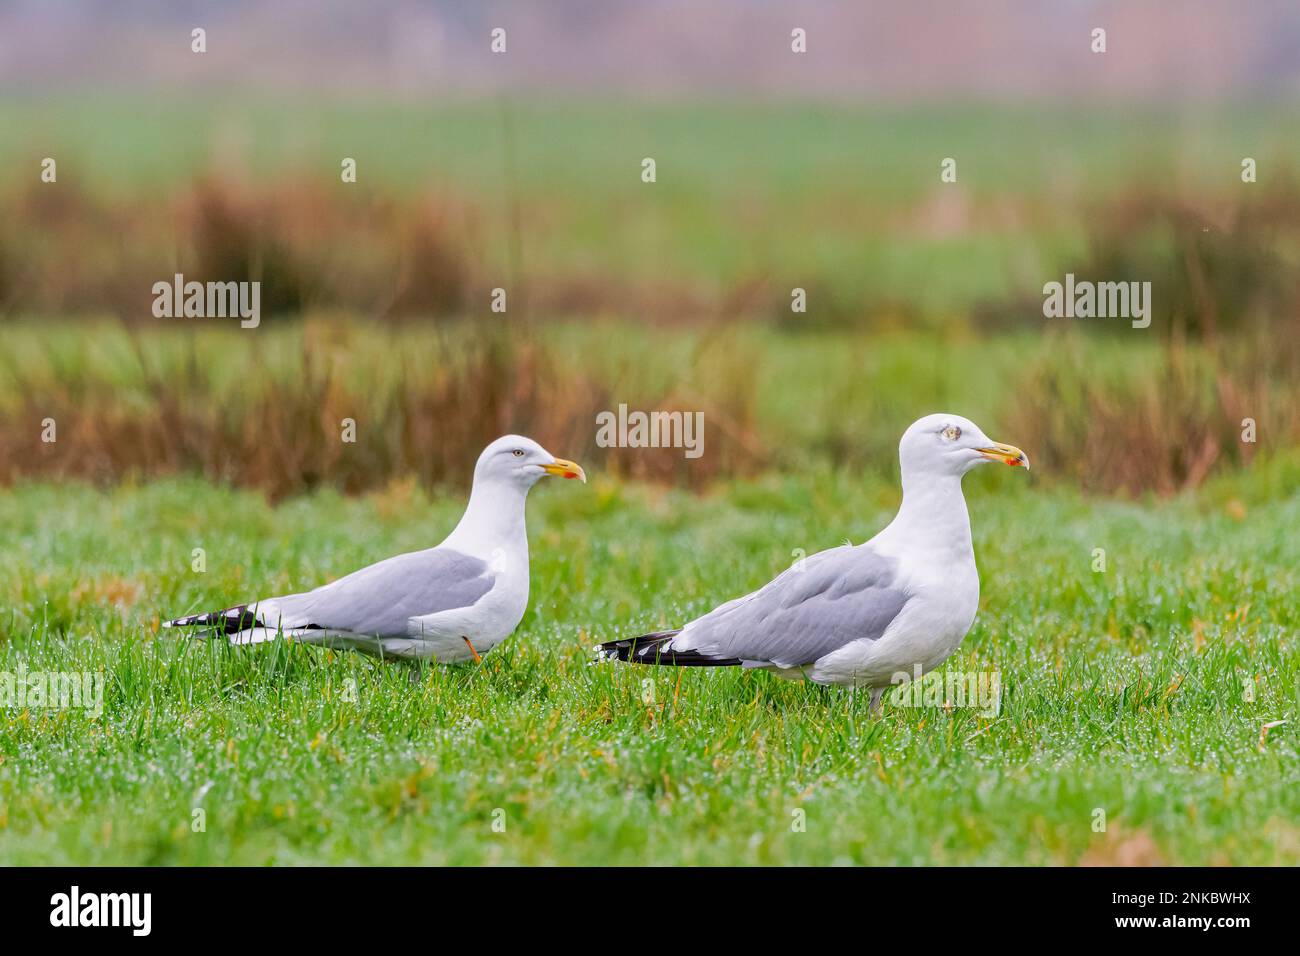 Close up of a couple European Herring Gulls, Larus Argentatus, yellow beak with red spot in a green pasture against blurry background. The male has a Stock Photo